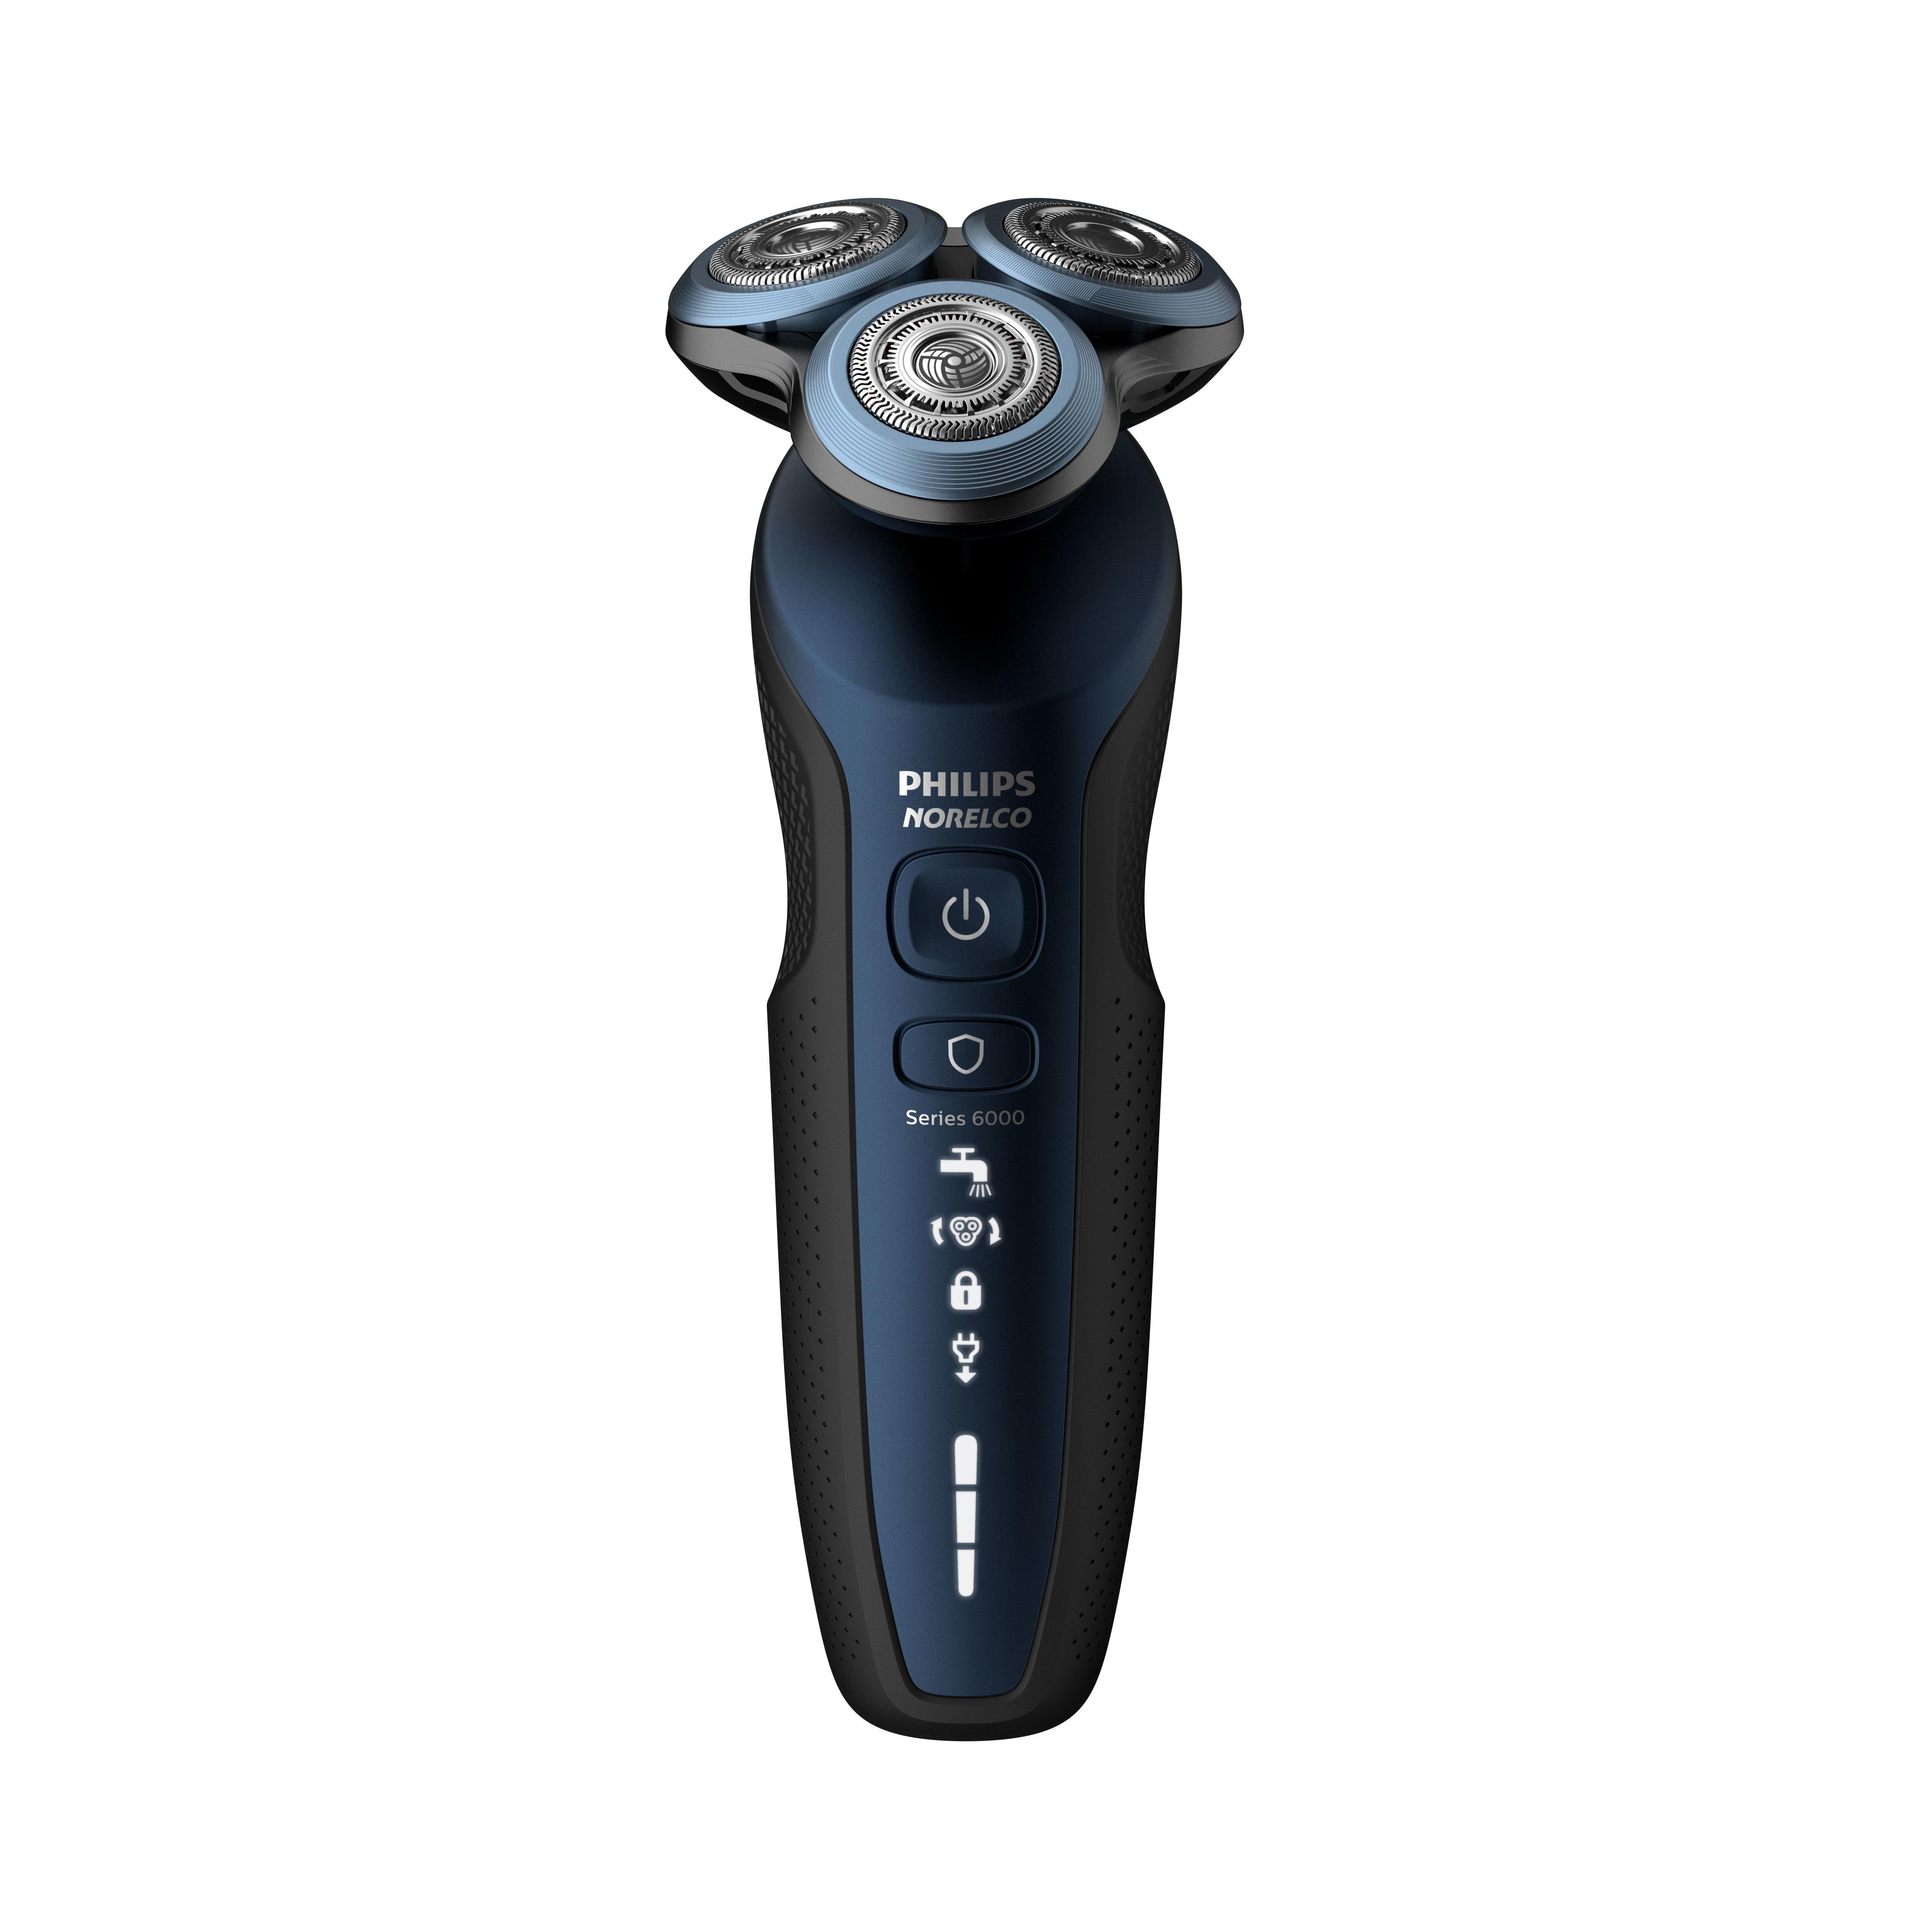 Philips Norelco Electric Shaver 6850 with Precision Trimmer and Nose Trimmer Attachment, S6850/85 - image 7 of 7